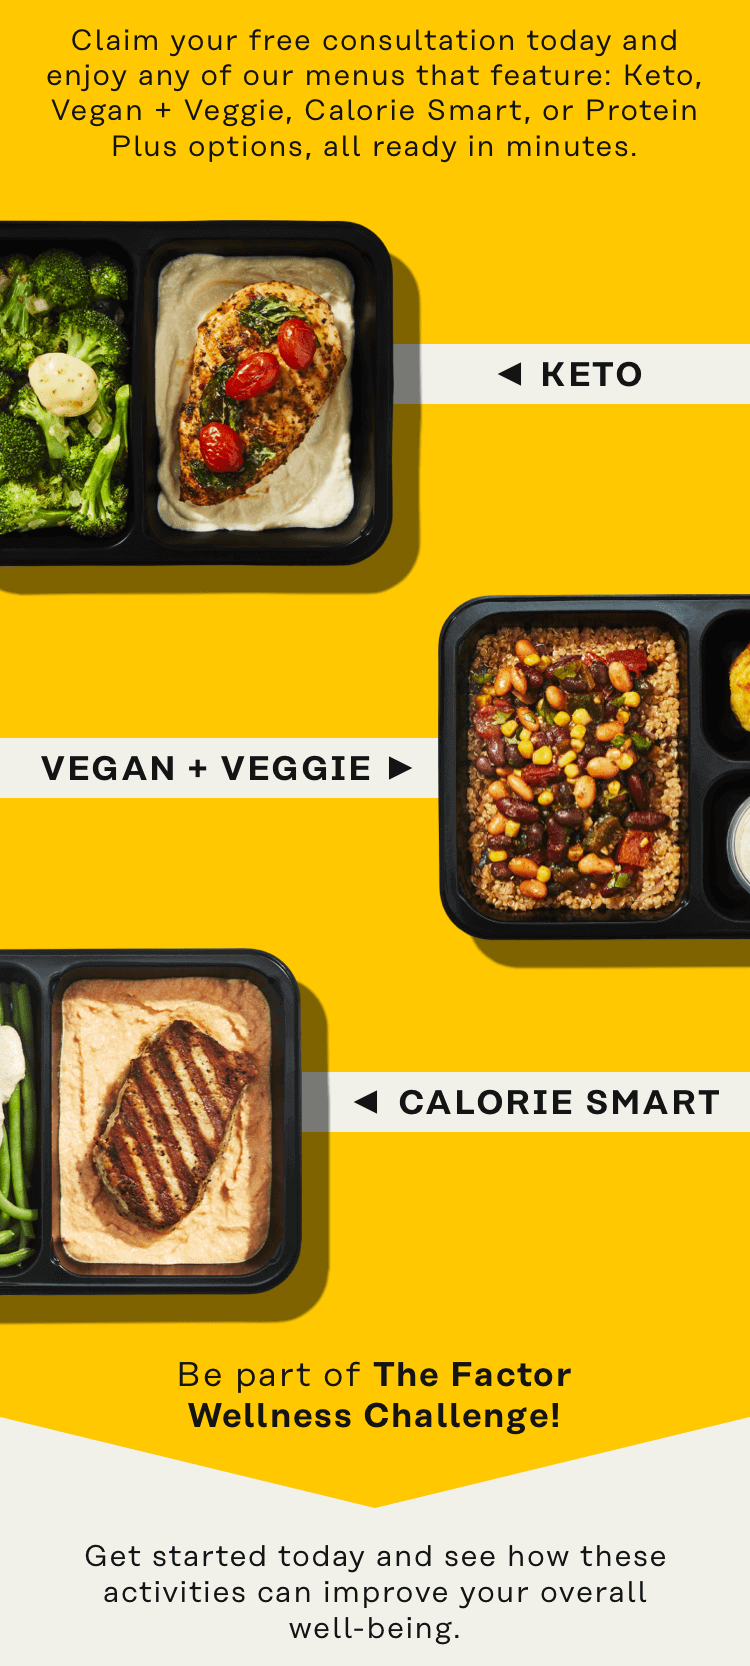 Claim your free consultation today and enjoy any of our menus that feature: Keto, Vegan + Veggie, Calorie Smart, or Protein Plus options, all ready in minutes.